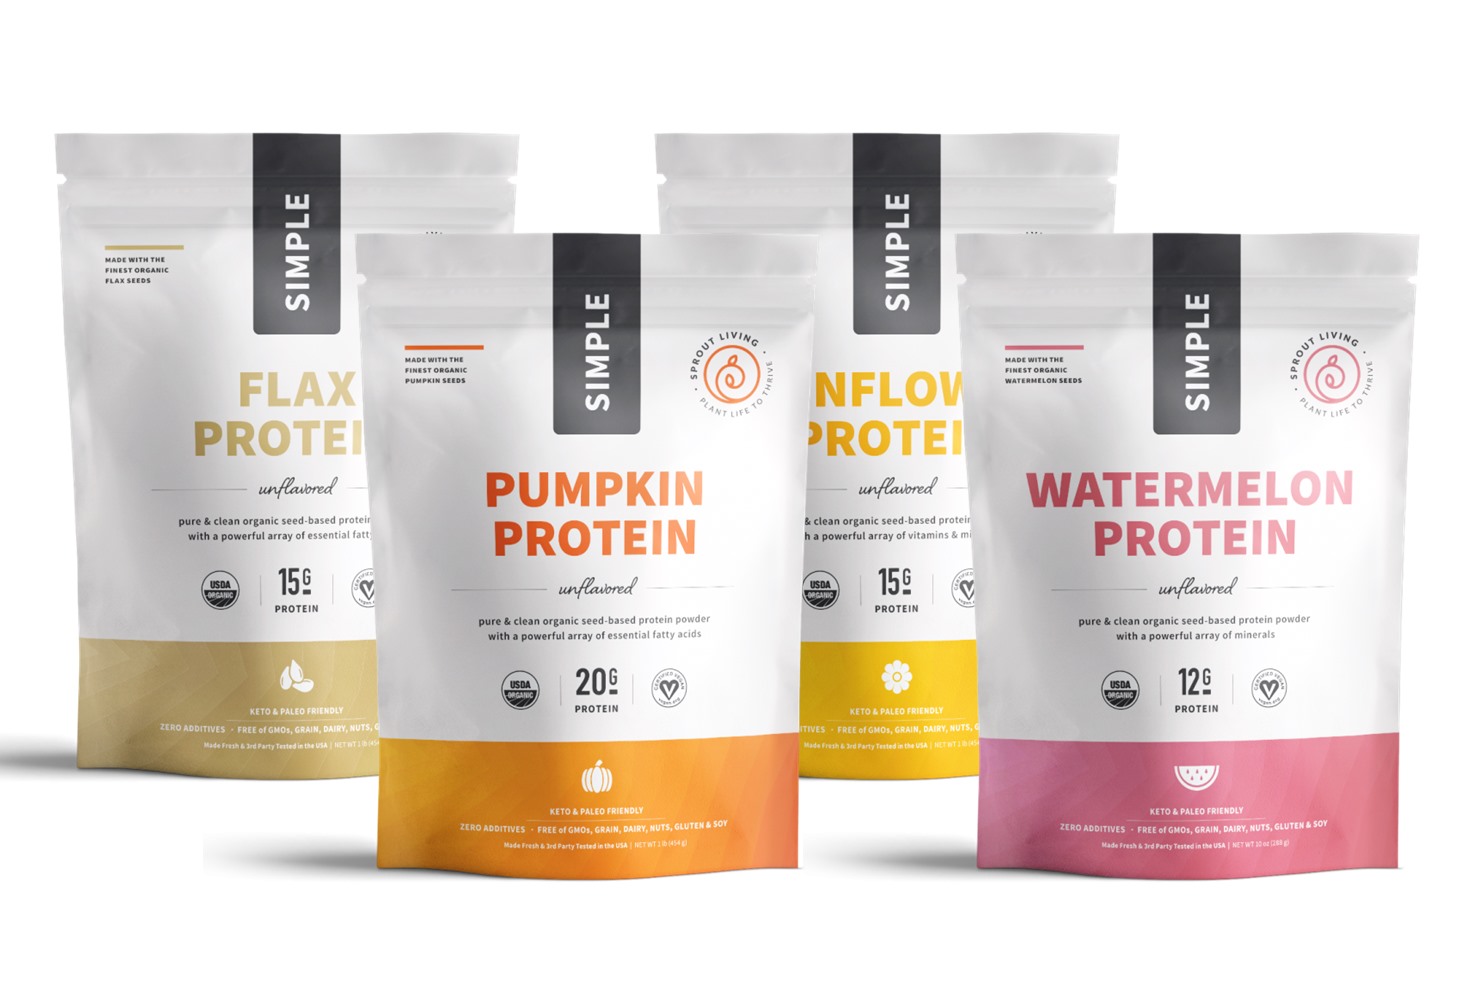 Sprout Living Seed Protein Powders Reviews and Info - vegan, gluten-free, dairy-free, nut-free, soy-free - simple protein powders made with watermelon, sunflower, flax, and pumpkin seeds